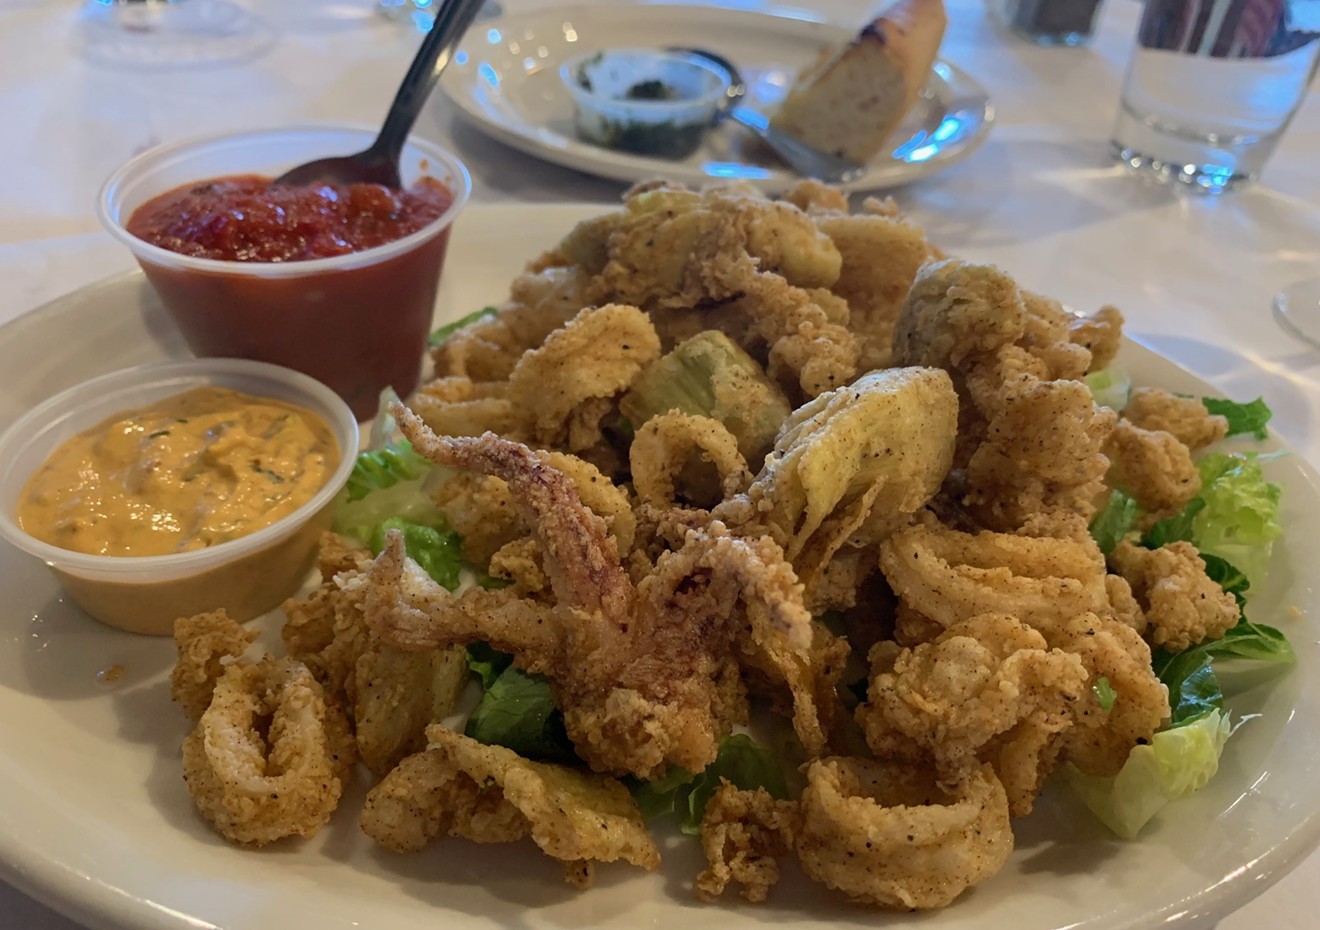 This could be the best fried calamari in town.